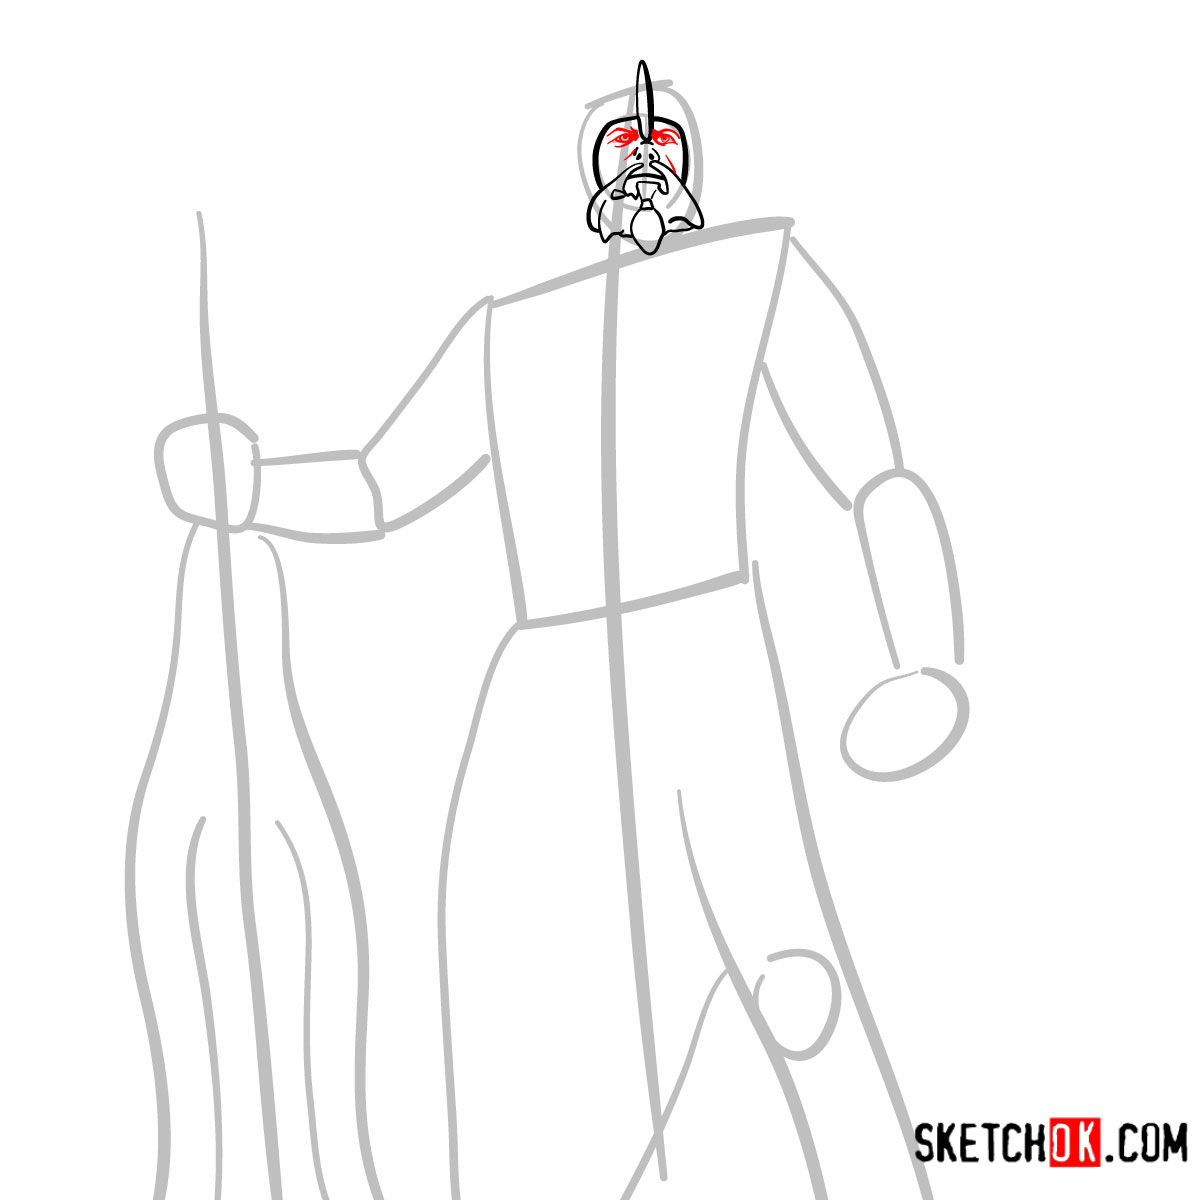 How to draw Poseidon God of War Sketchok easy drawing guides. 